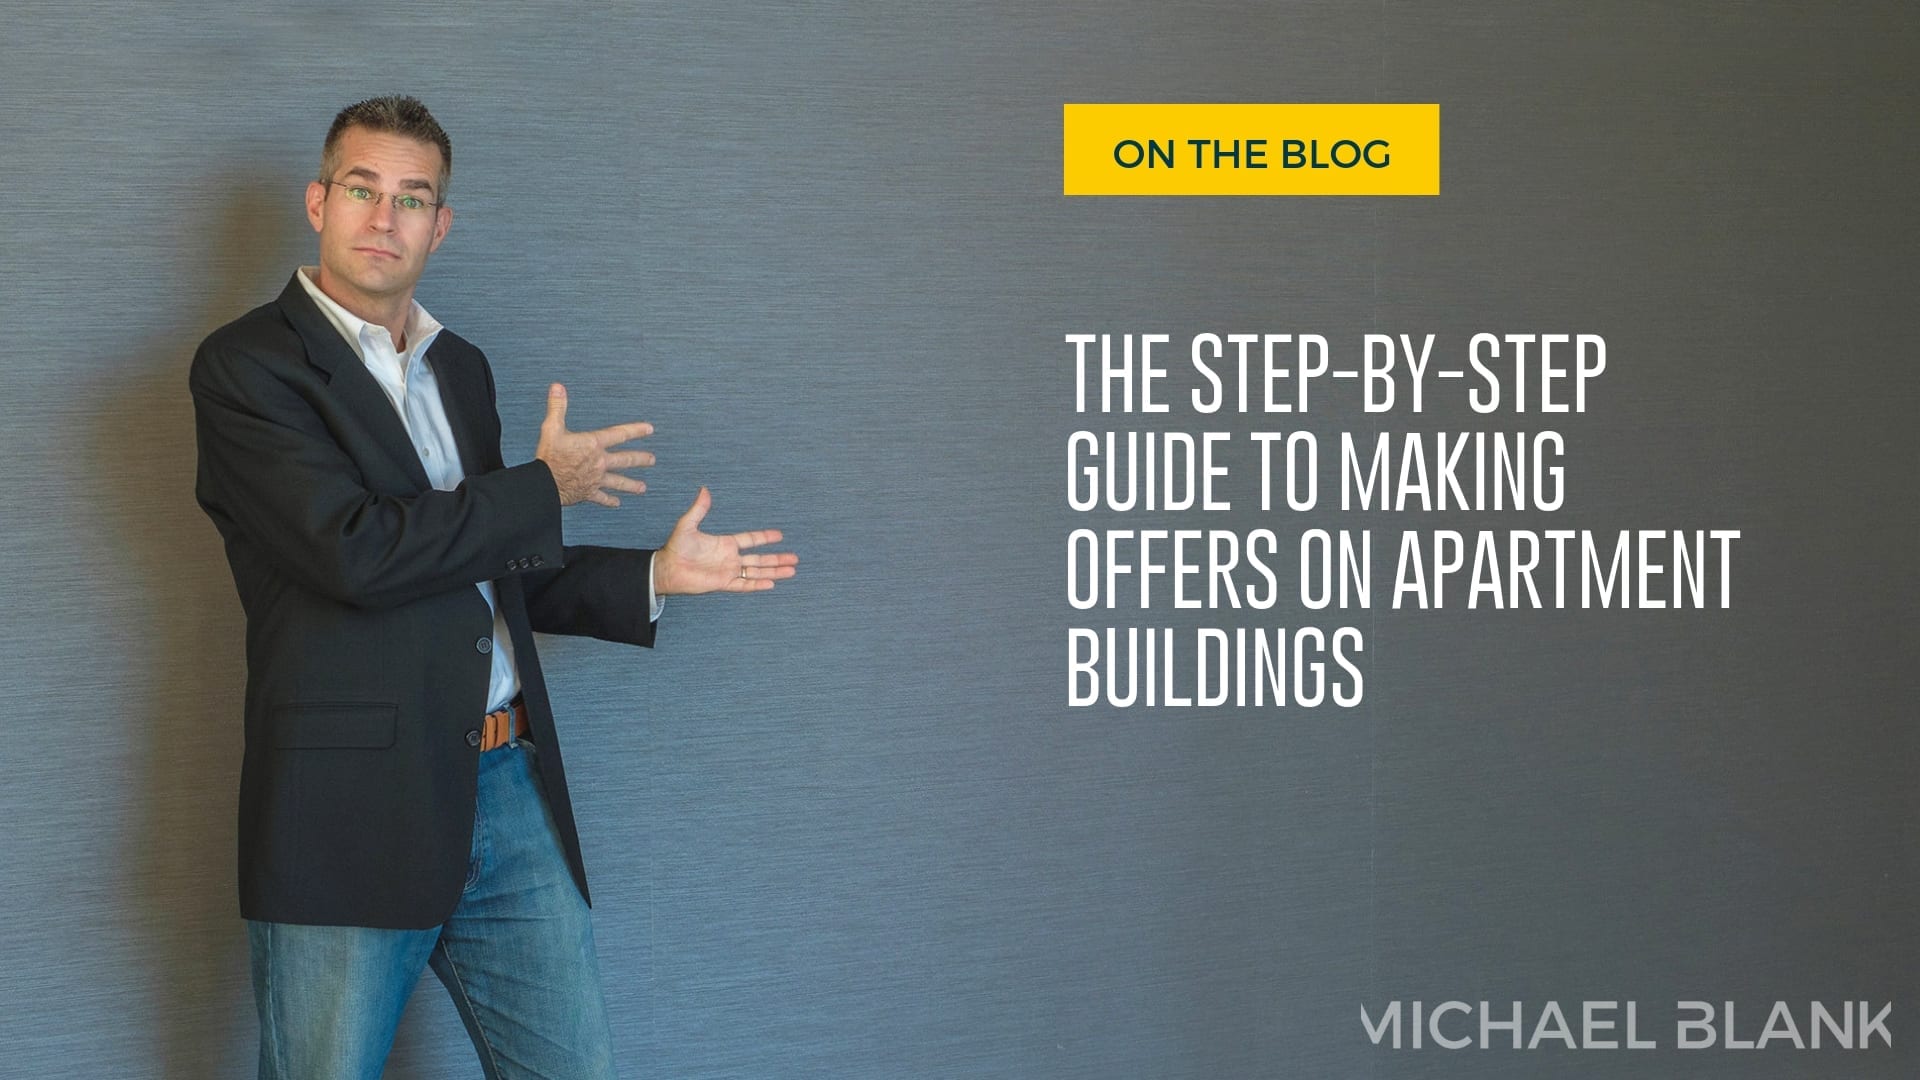 The Step-by-Step Guide to Making Offers on Apartment Buildings